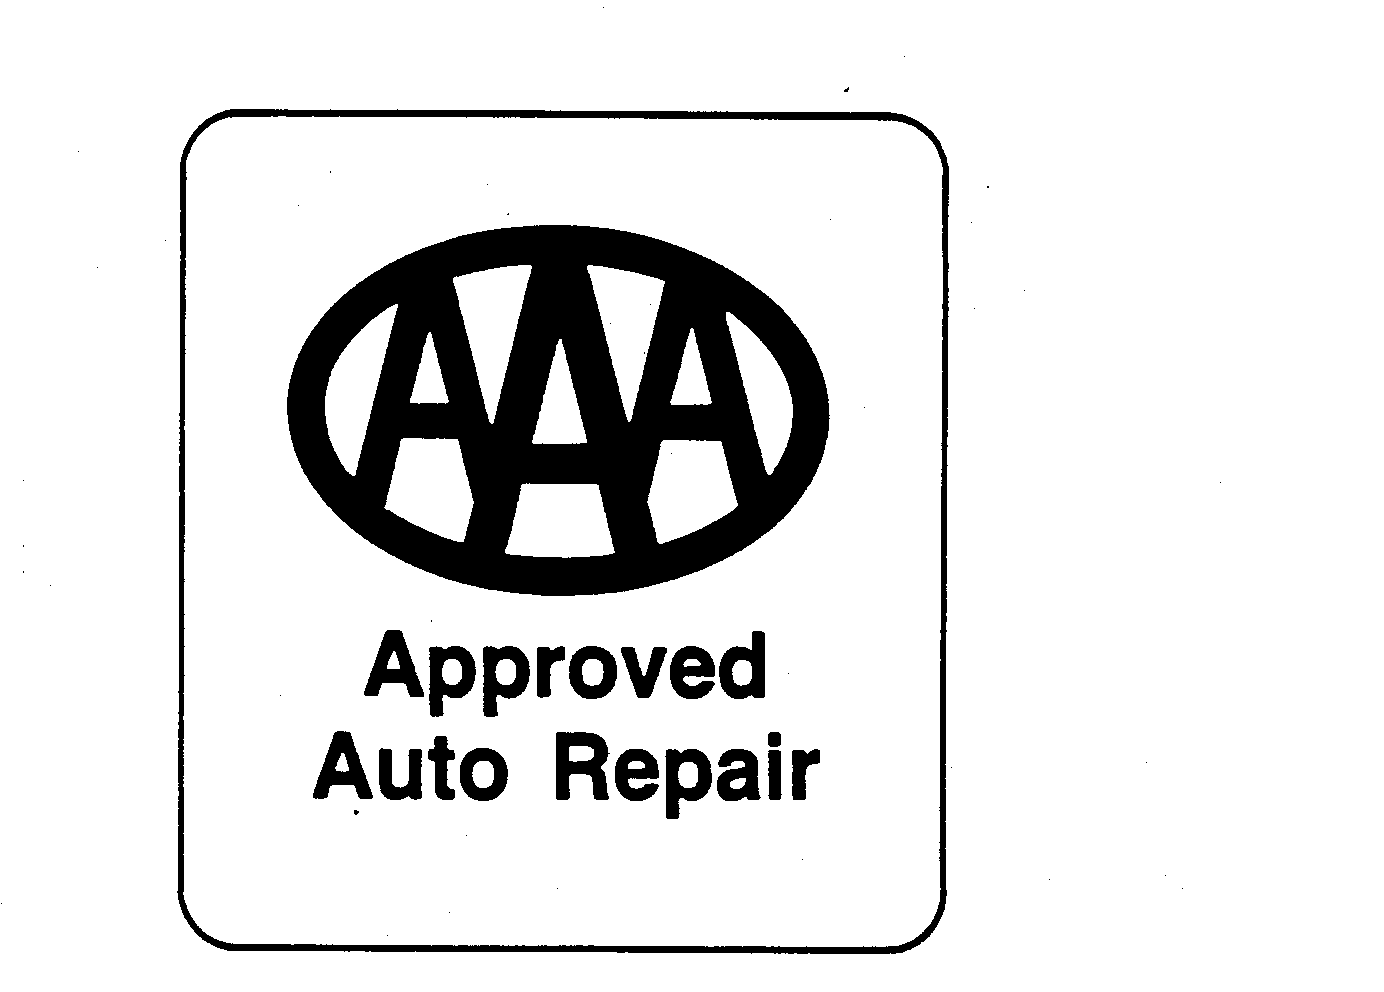  AAA APPROVED AUTO REPAIR